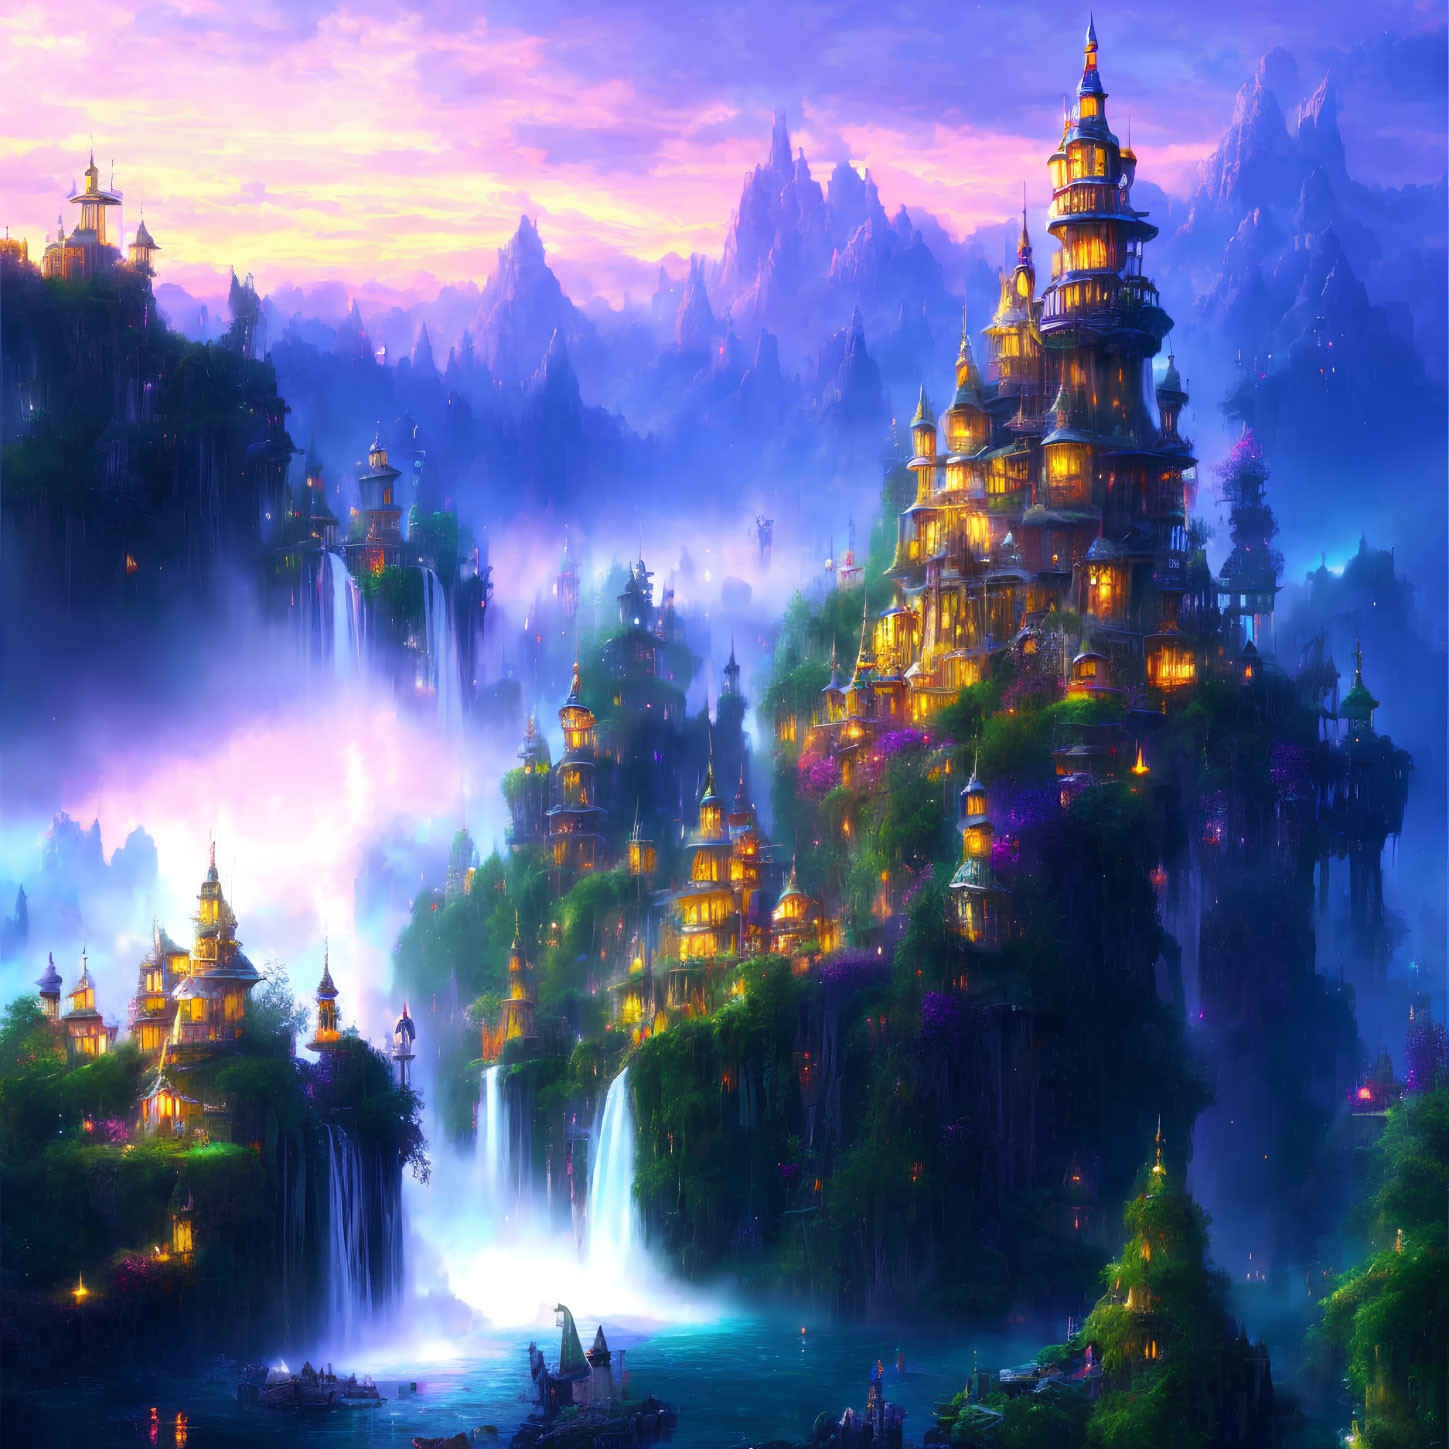 Mystical landscape with pagoda-style buildings, waterfalls, and mountains at twilight